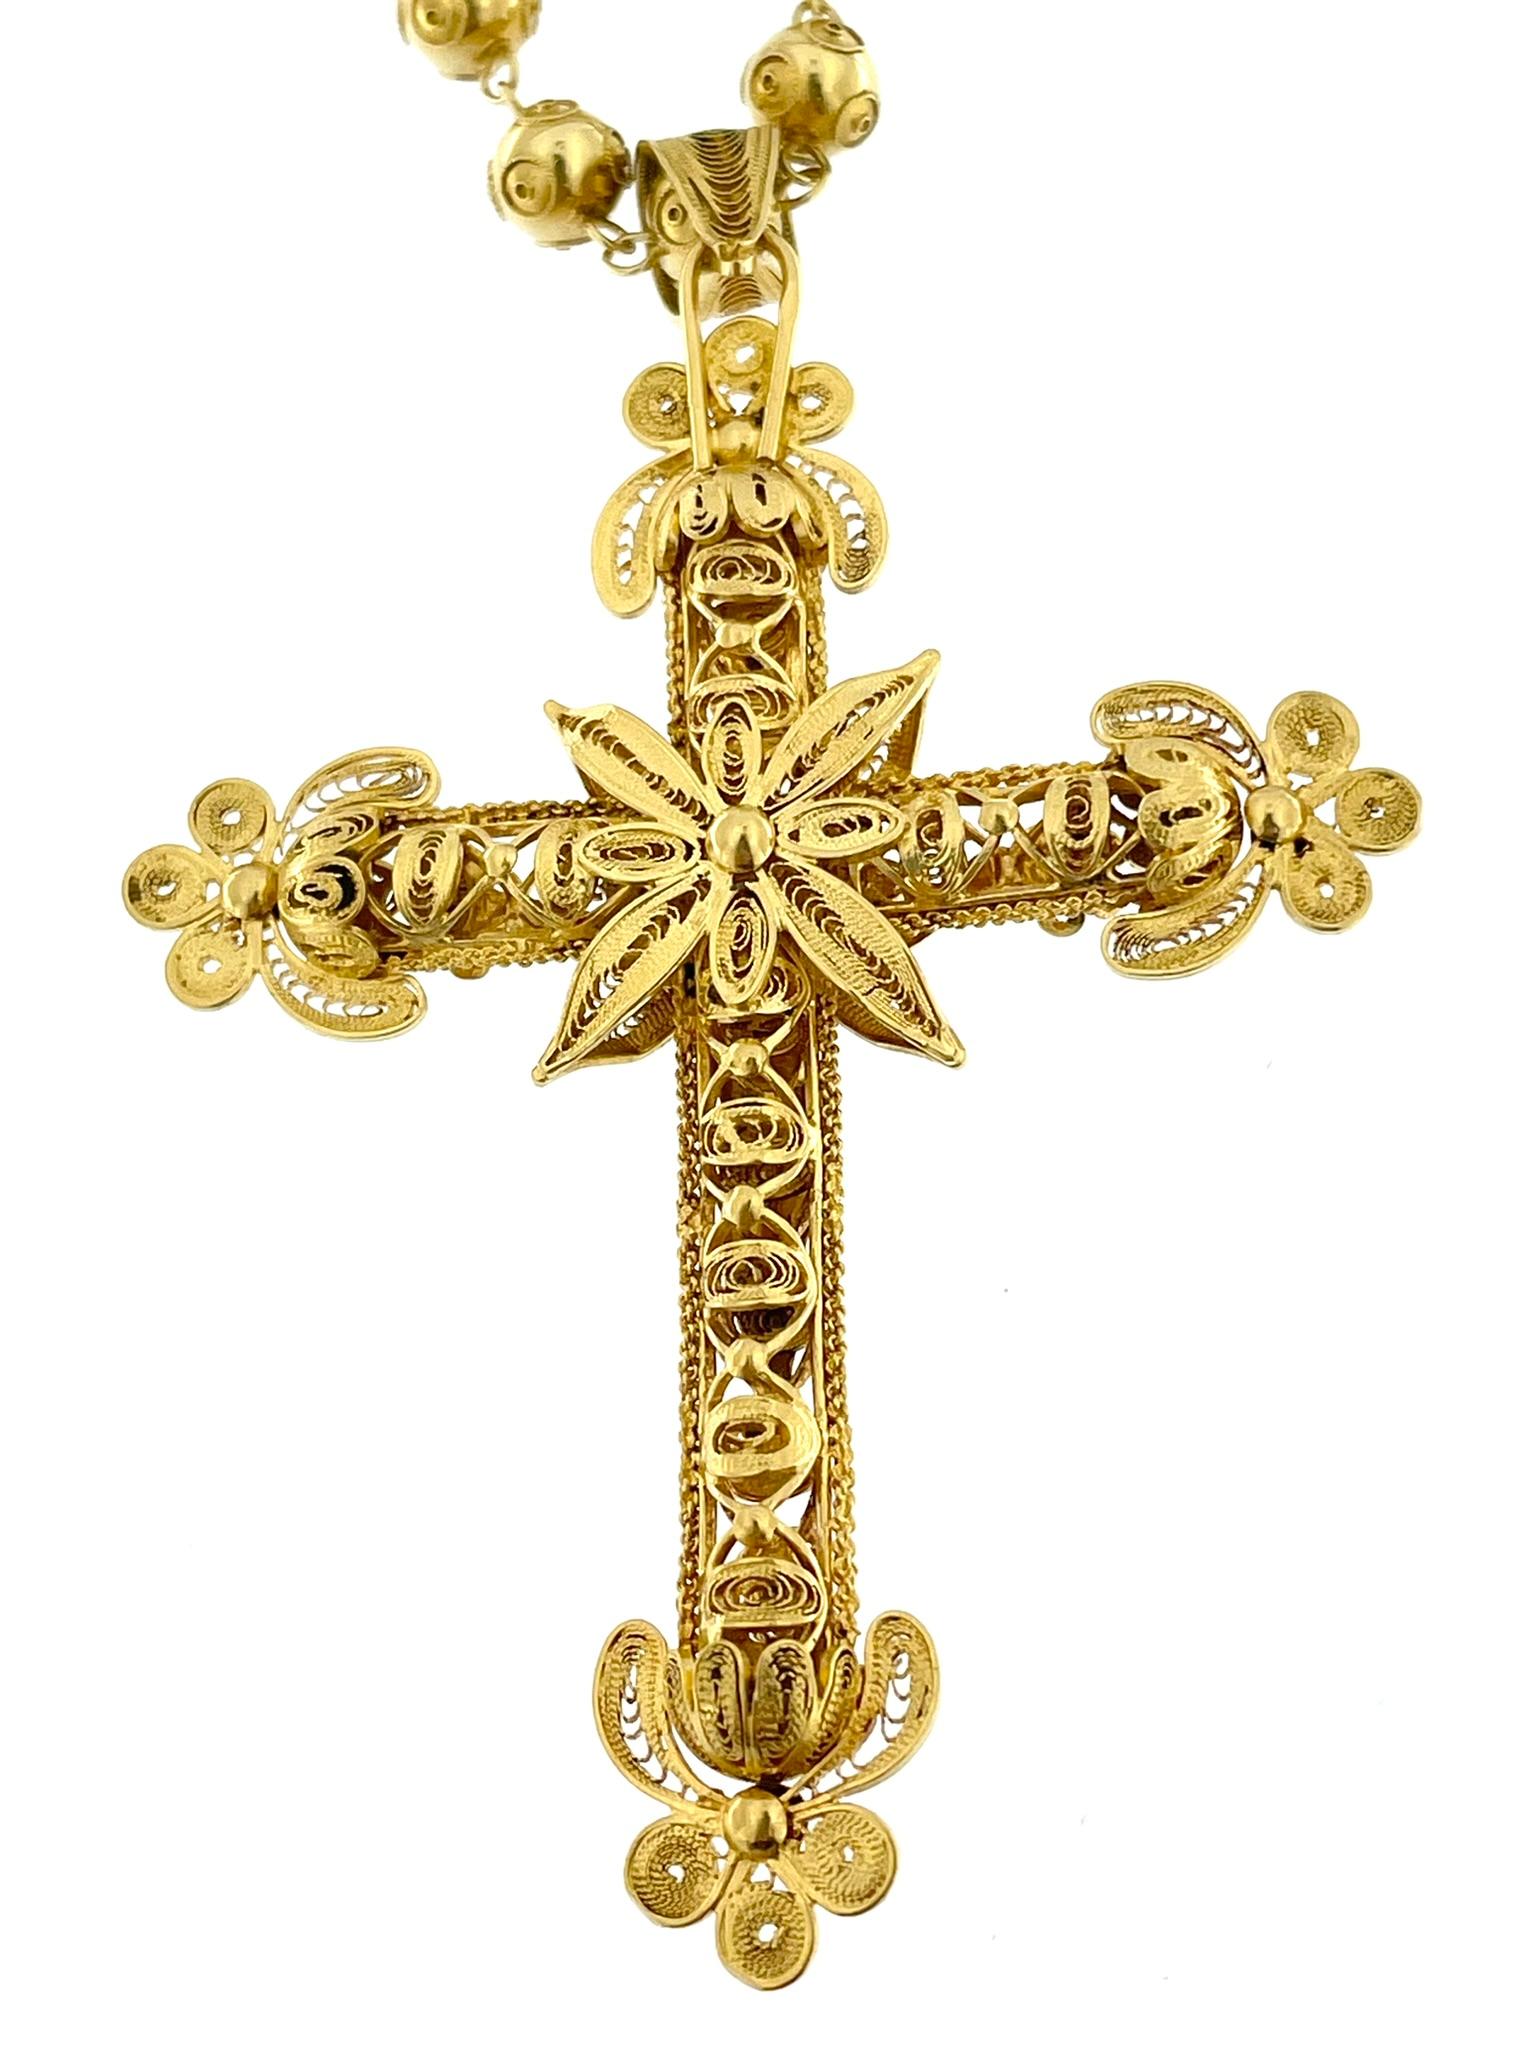 Traditional Hand-Made Portuguese Crucifix with Chain 19 karat Yellow Gold For Sale 3